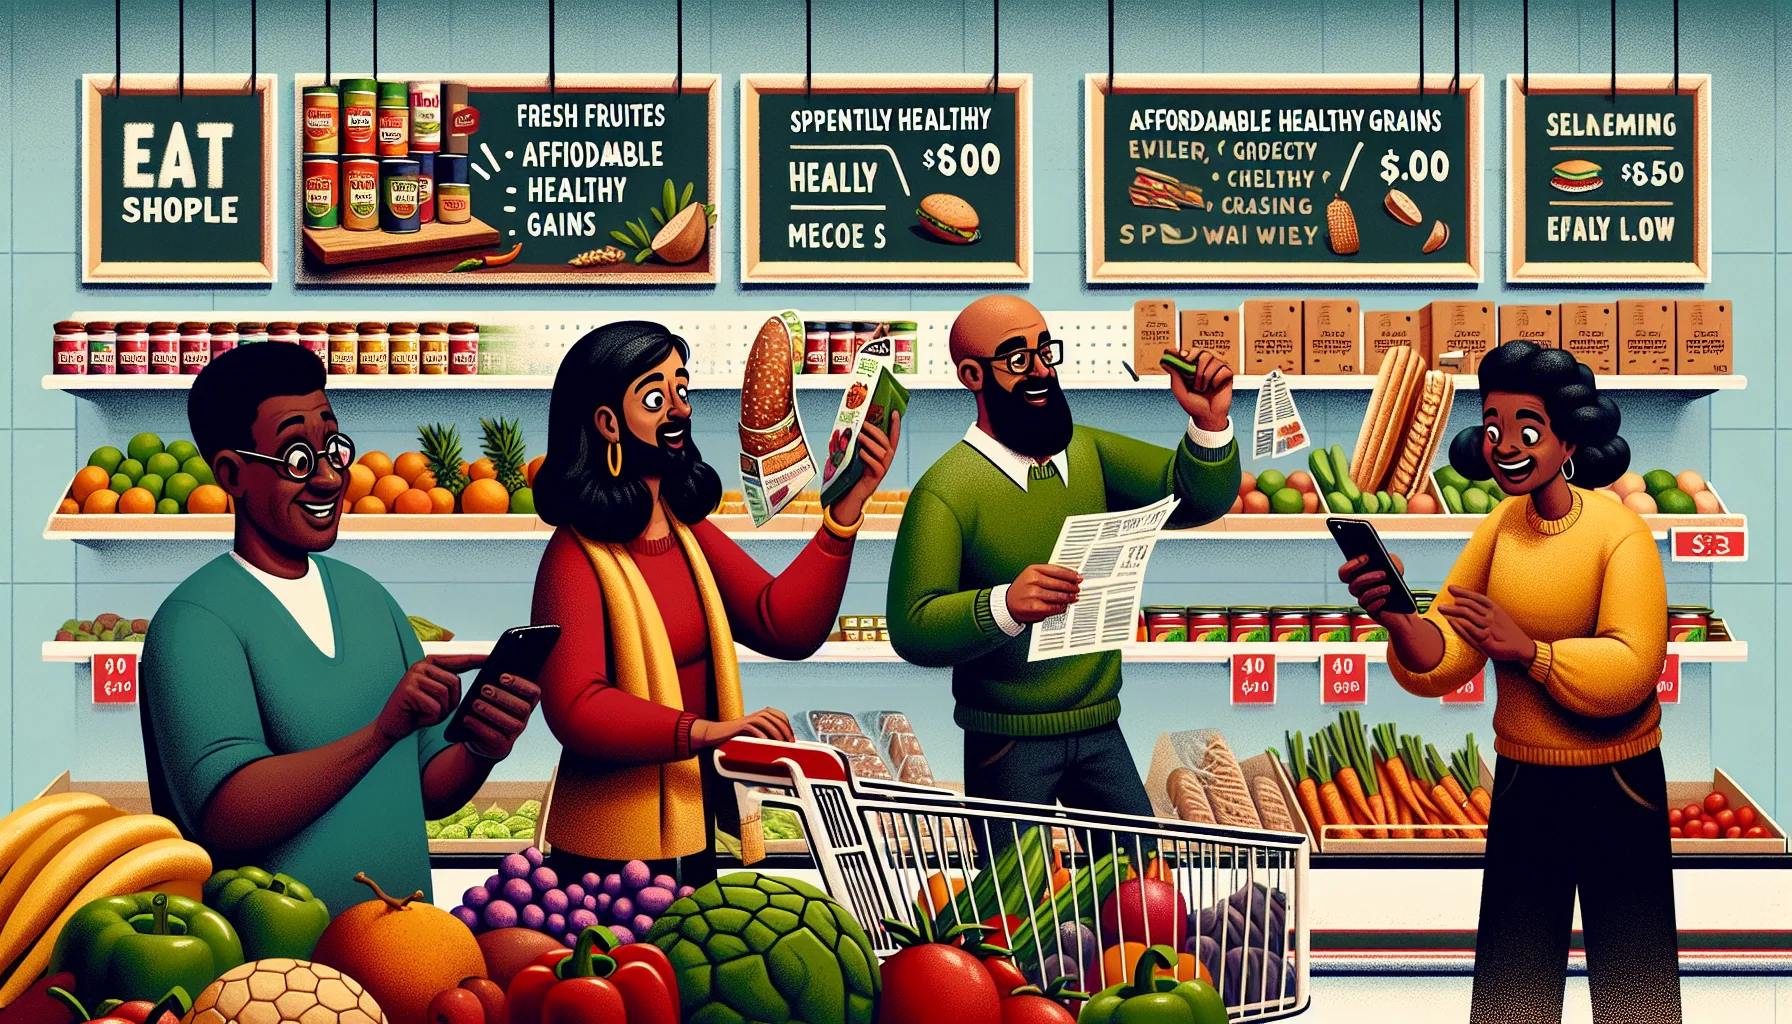 Create a humorous yet realistic scene set in a grocery store. The available items are fresh fruits, vegetables, affordable healthy grains and economical lean meat cuts. Incorporate characters - a Black woman efficiently using coupons, a Middle Eastern man comparing product prices on his smartphone, and a Caucasian child excitedly grabbing seasonal fruits from the shelf. Add a subtle background banner reading 'Eat Healthy, Spend Wisely.' The overall atmosphere should suggest effective budget management for grocery shopping while emphasizing the benefits of cost-effective yet healthy eating.